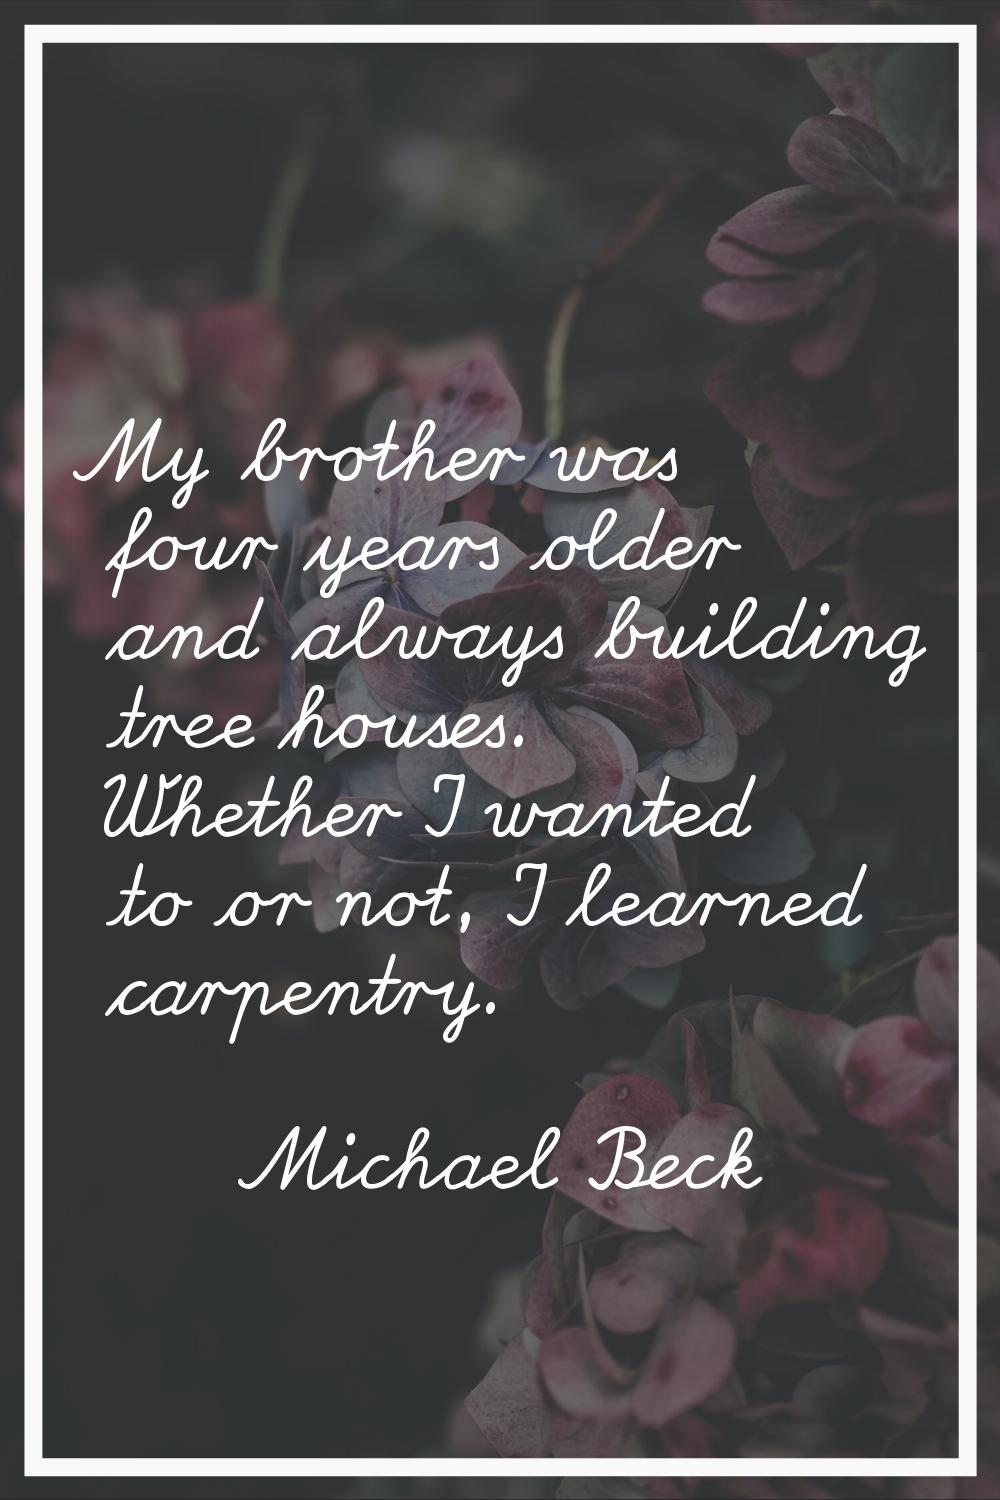 My brother was four years older and always building tree houses. Whether I wanted to or not, I lear